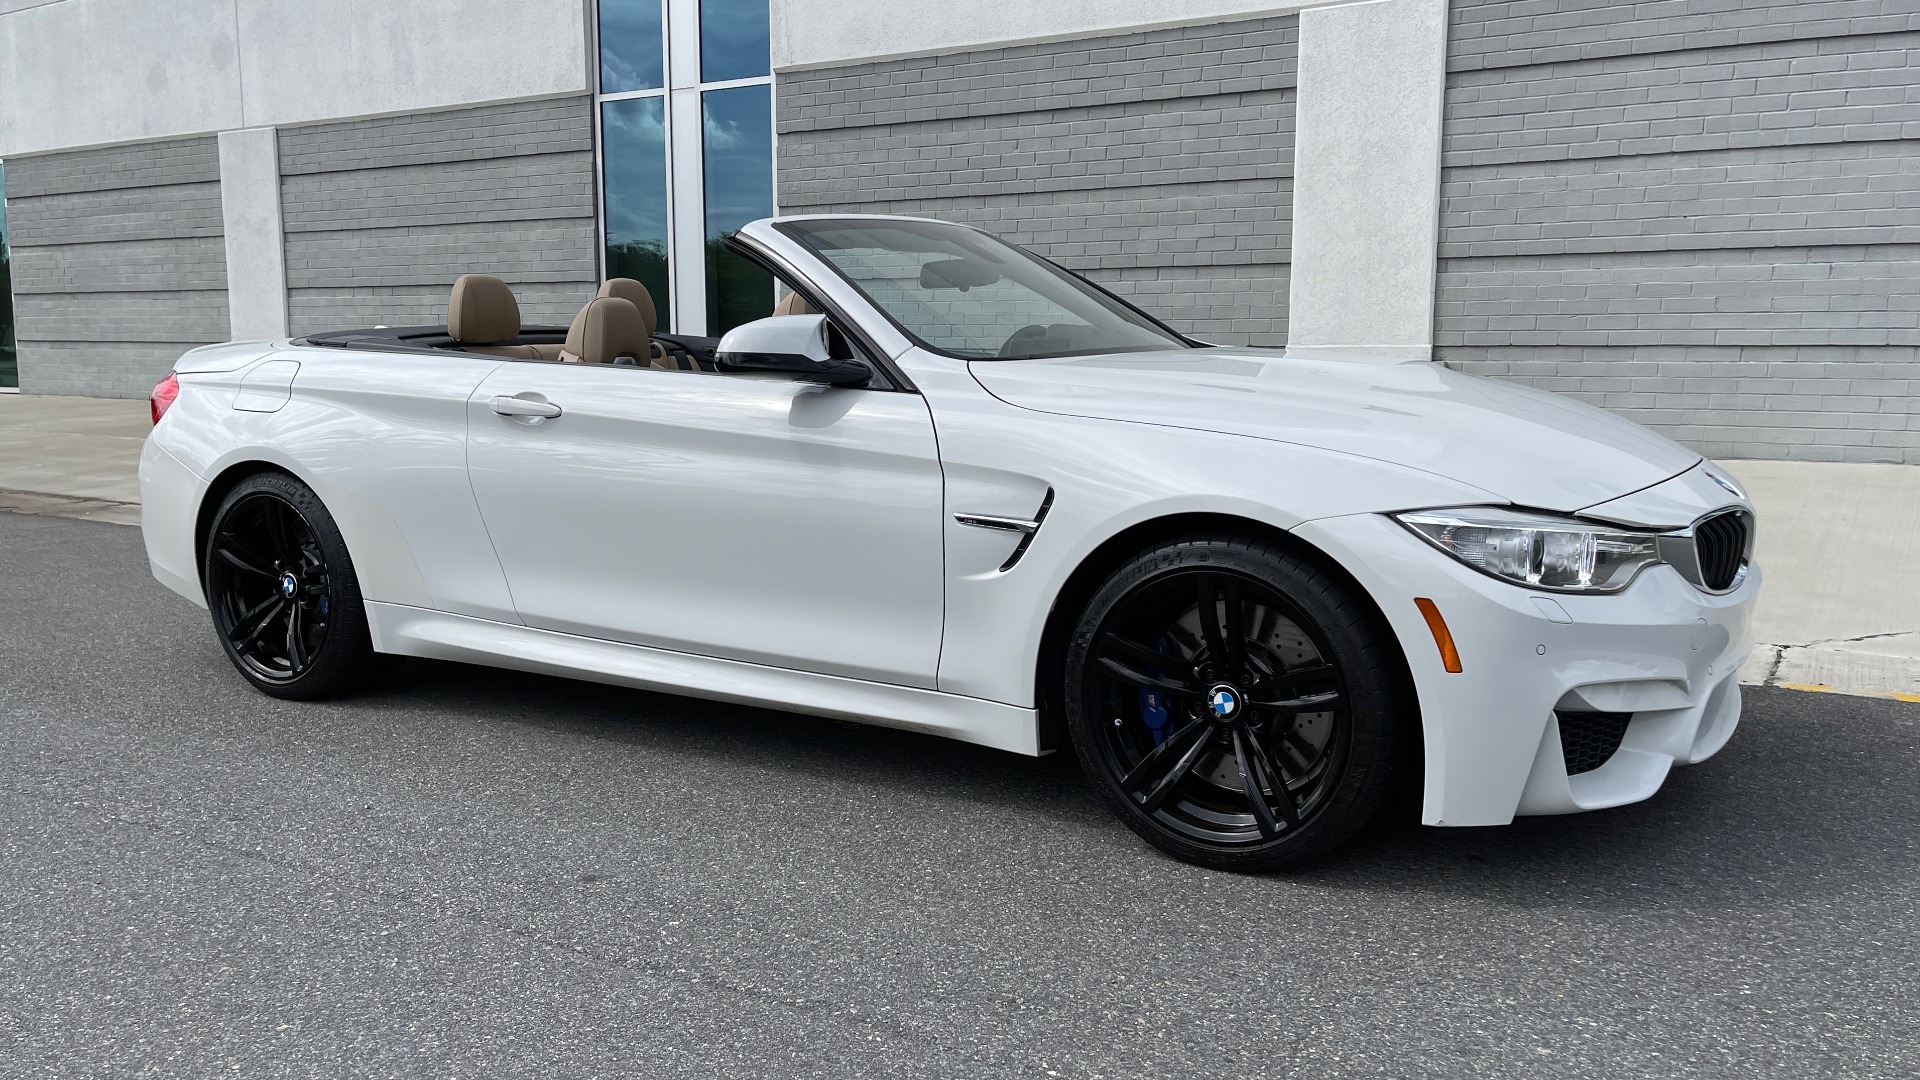 Used 2016 BMW M4 CONVERTIBLE 3.0L / 7-SPD AUTO / EXECUTIVE / ADAPT M SUSP / REARVIEW for sale Sold at Formula Imports in Charlotte NC 28227 6